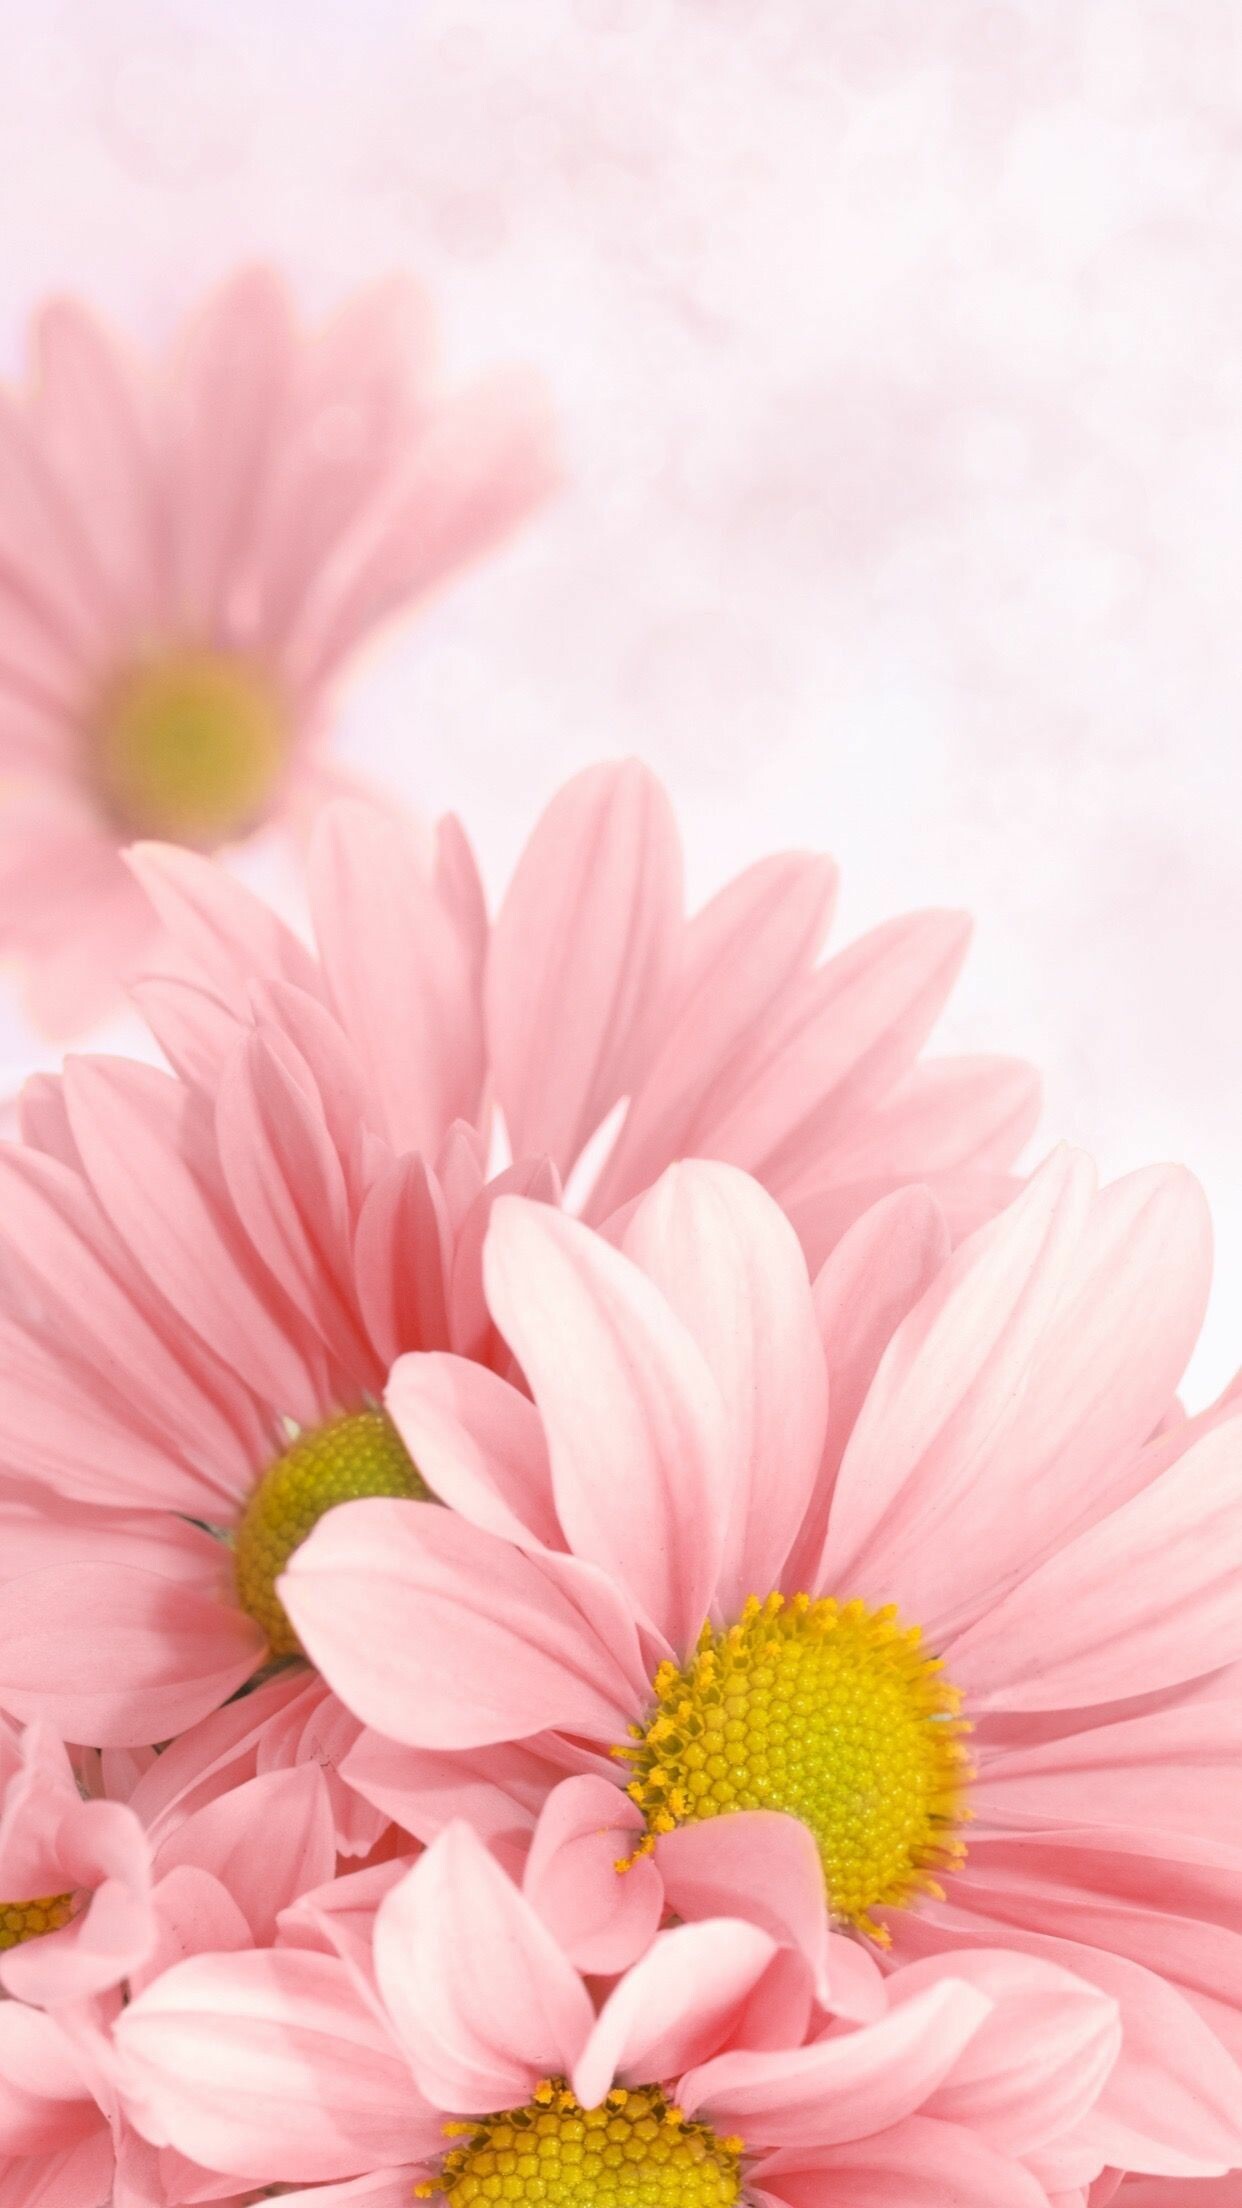 Daisy: Exuding freshness, happiness, and innocence, daisies are one of the most well-known flowers around the world. 1250x2210 HD Wallpaper.